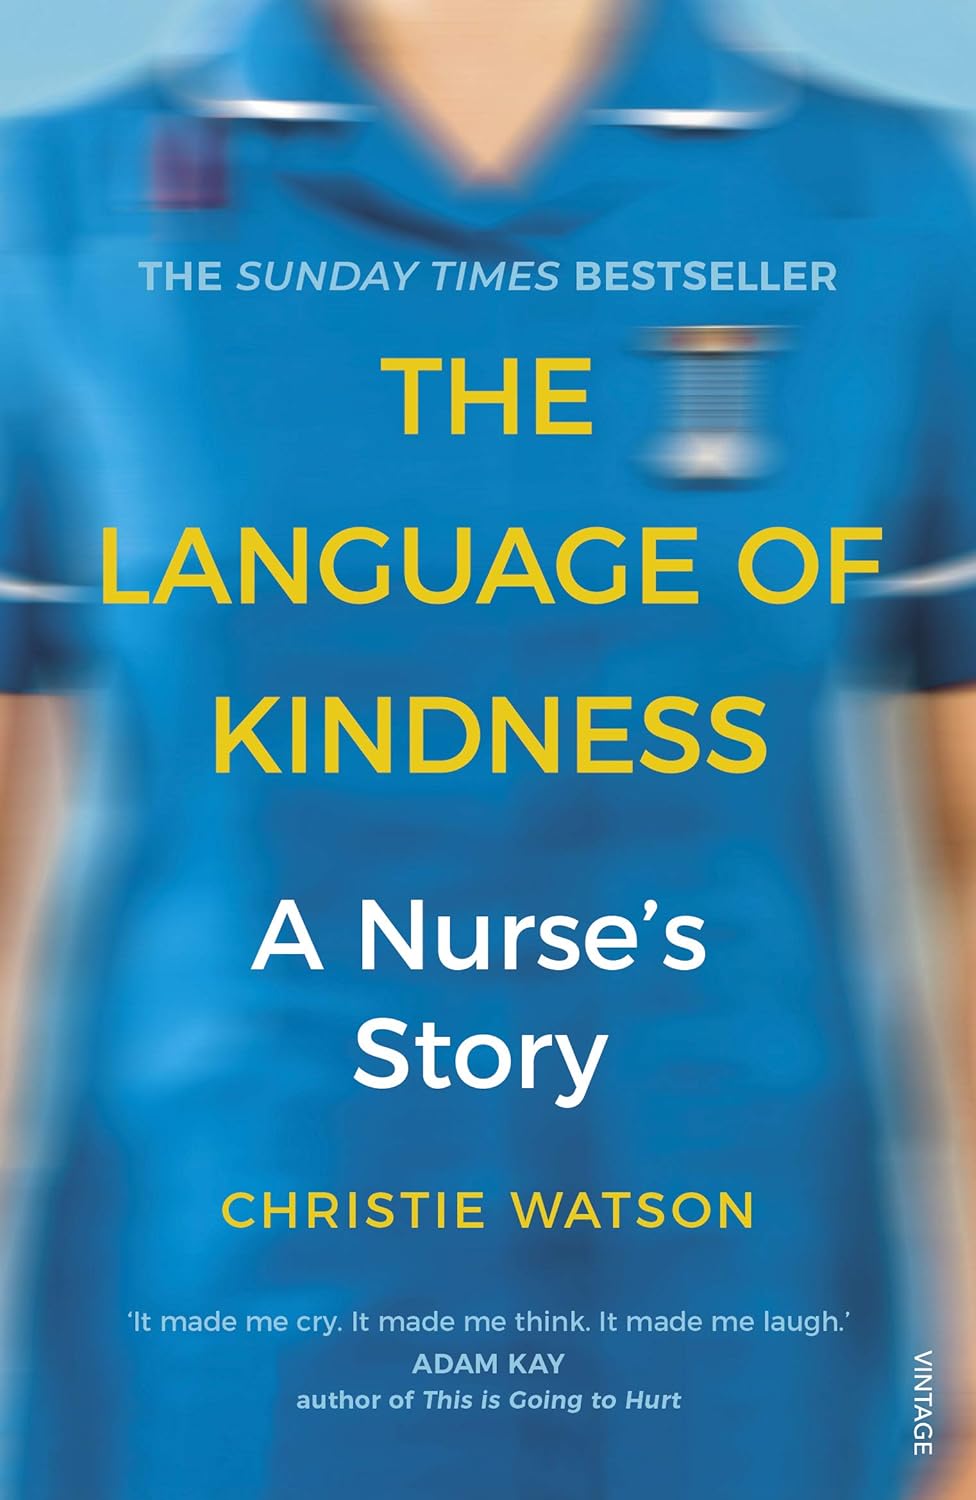 Book cover for The Language of Kindness: A Nurse's Story by Christie Watson